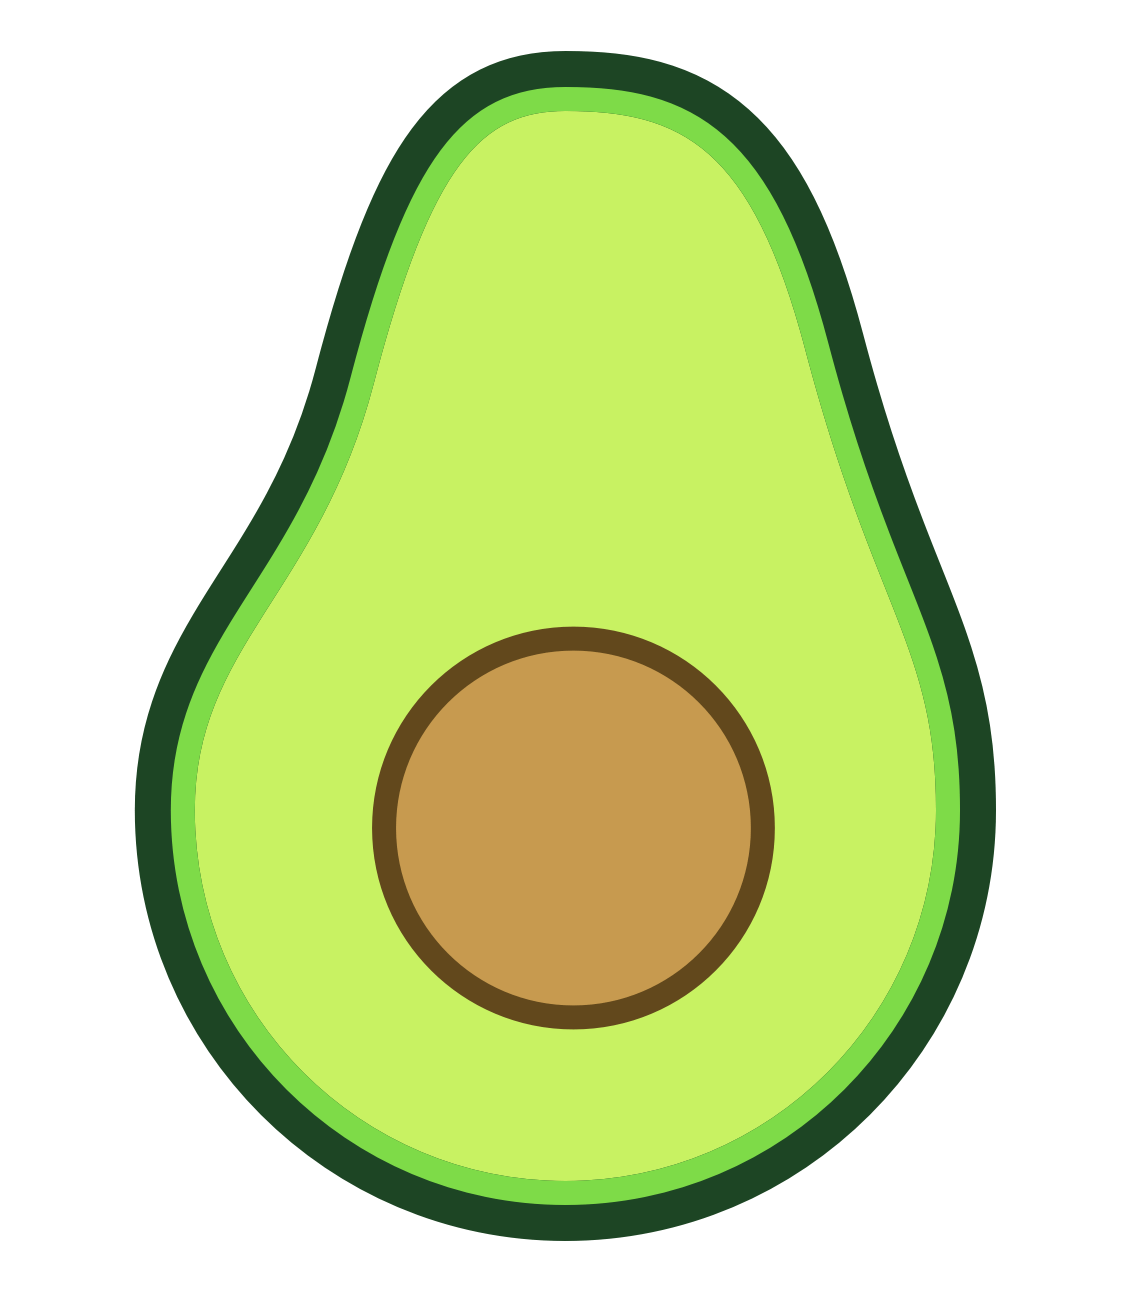 Aesthetic Avocado PNG Image